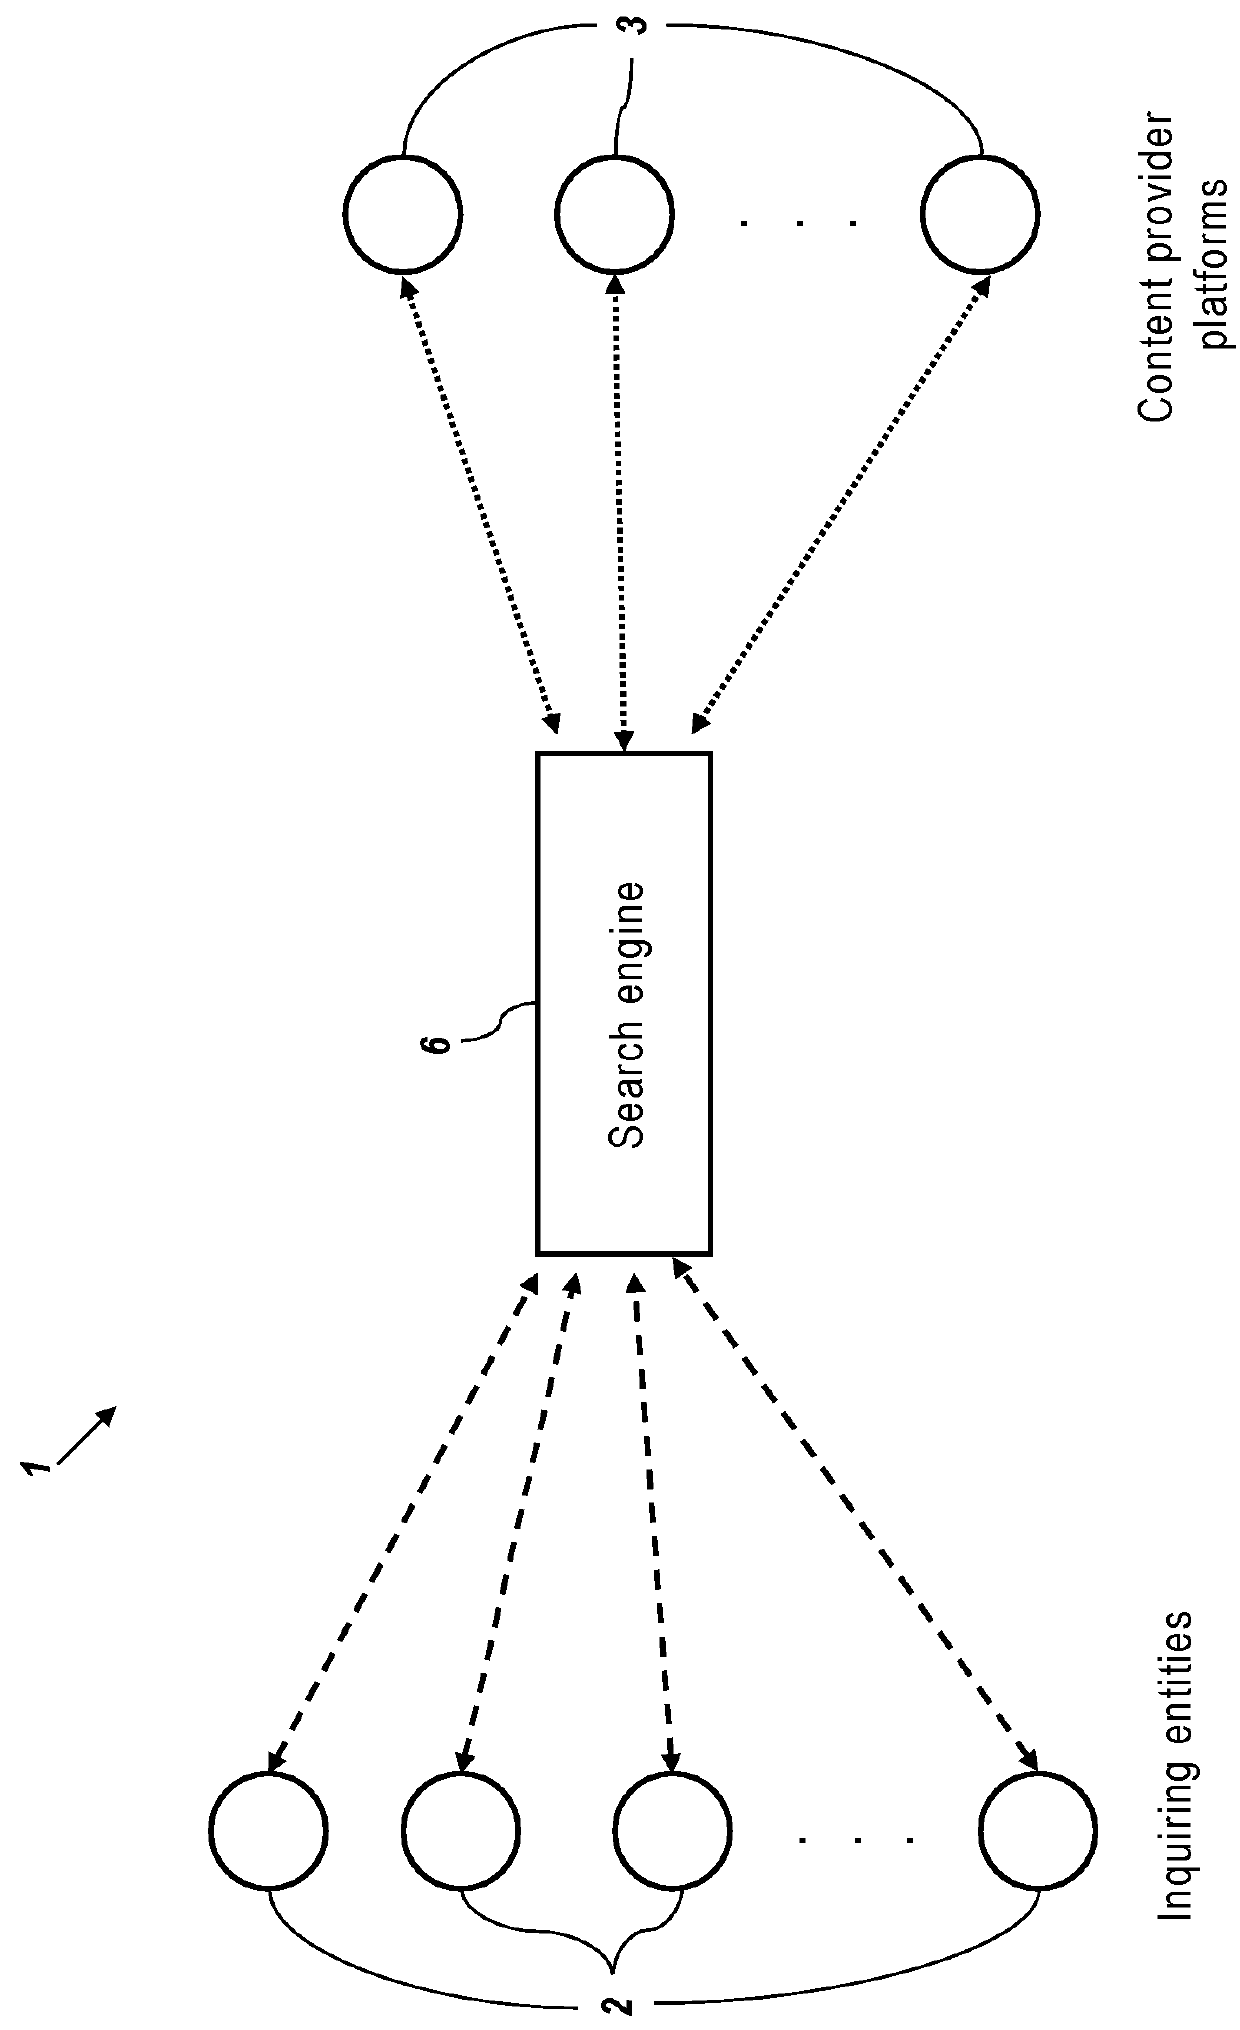 Processing information queries in a distributed information processing environment